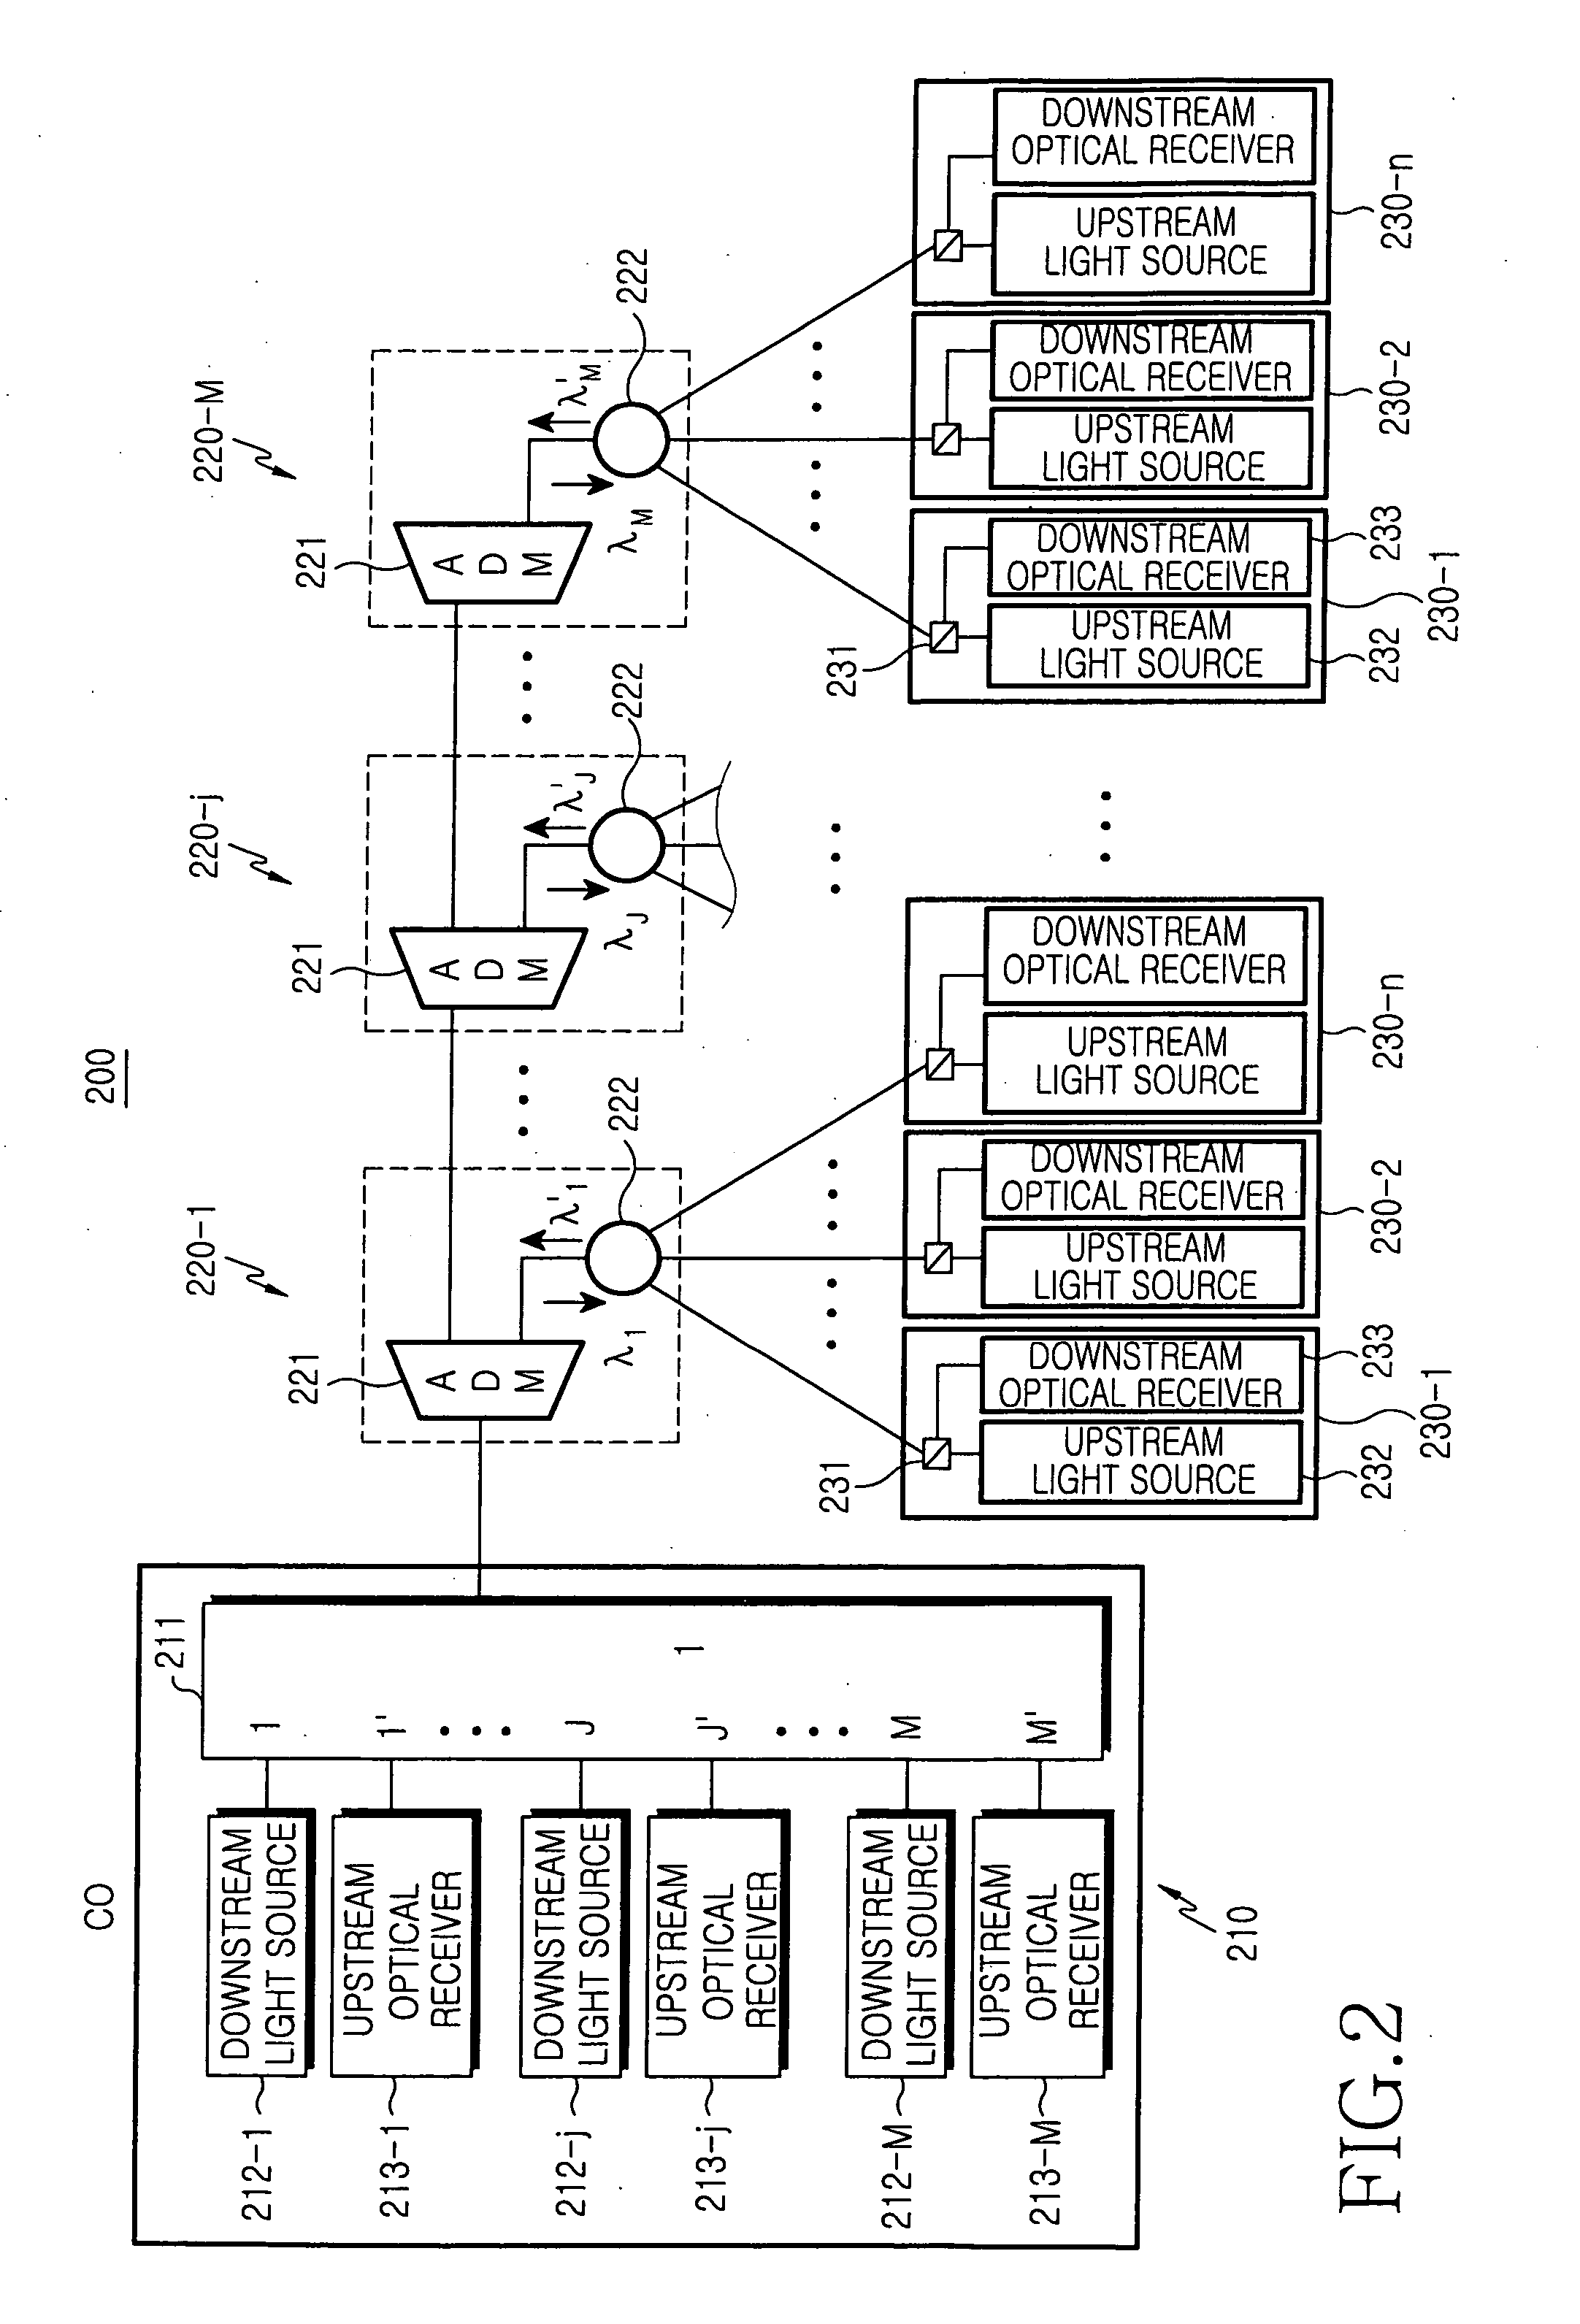 Passive optical network of bus structure